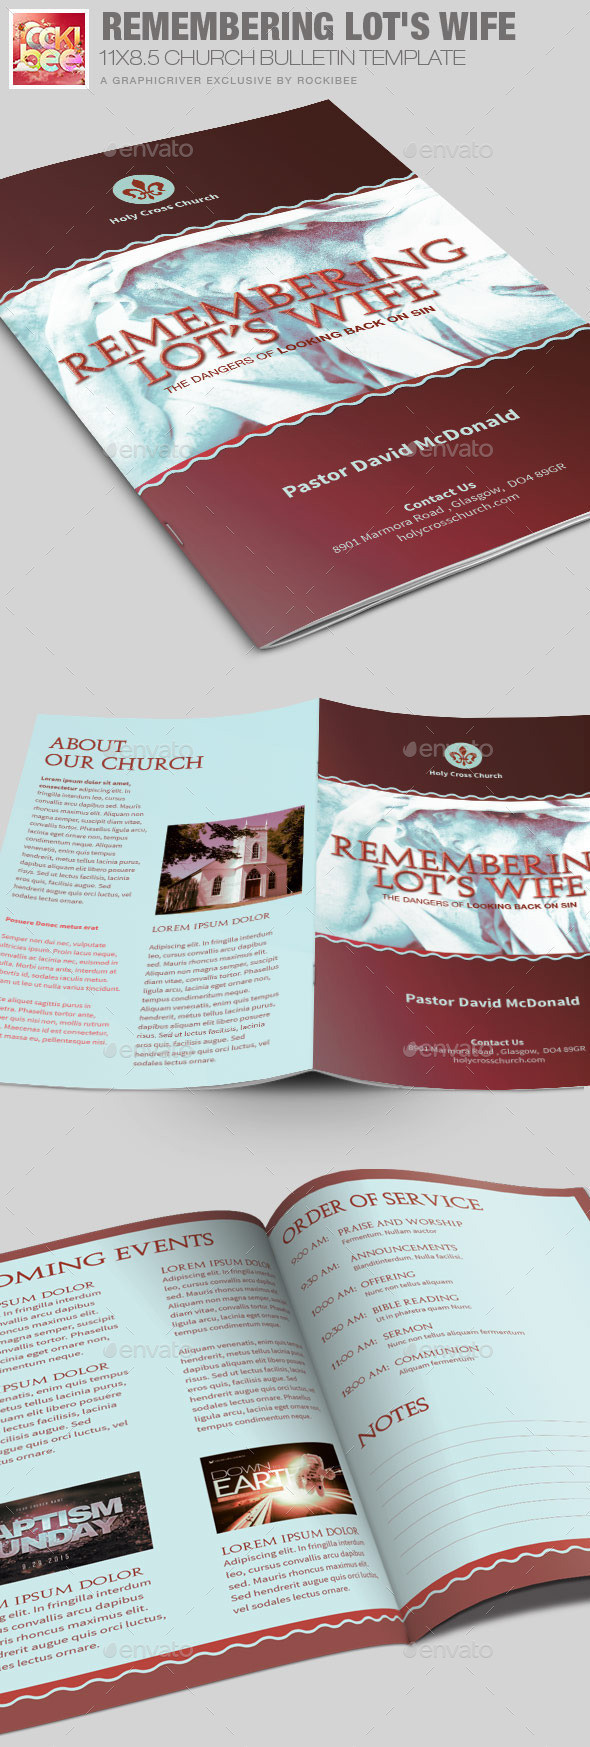 Remembering lots wife bulletin template image preview